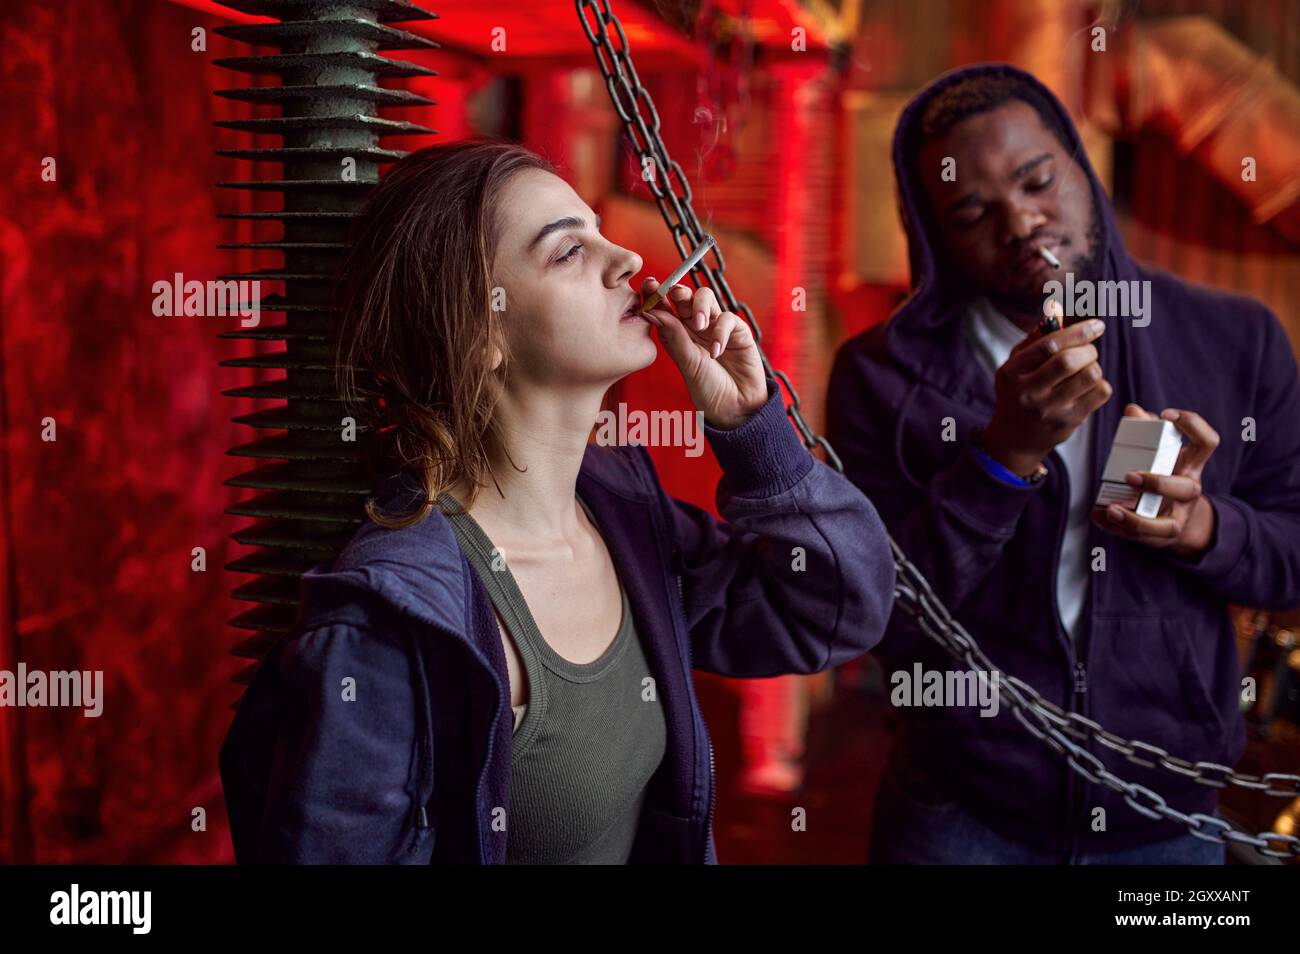 Drug addict man and woman smokes a cigarette while high in shebang. Narcotic addiction problem, eternal depression of junky people Stock Photo